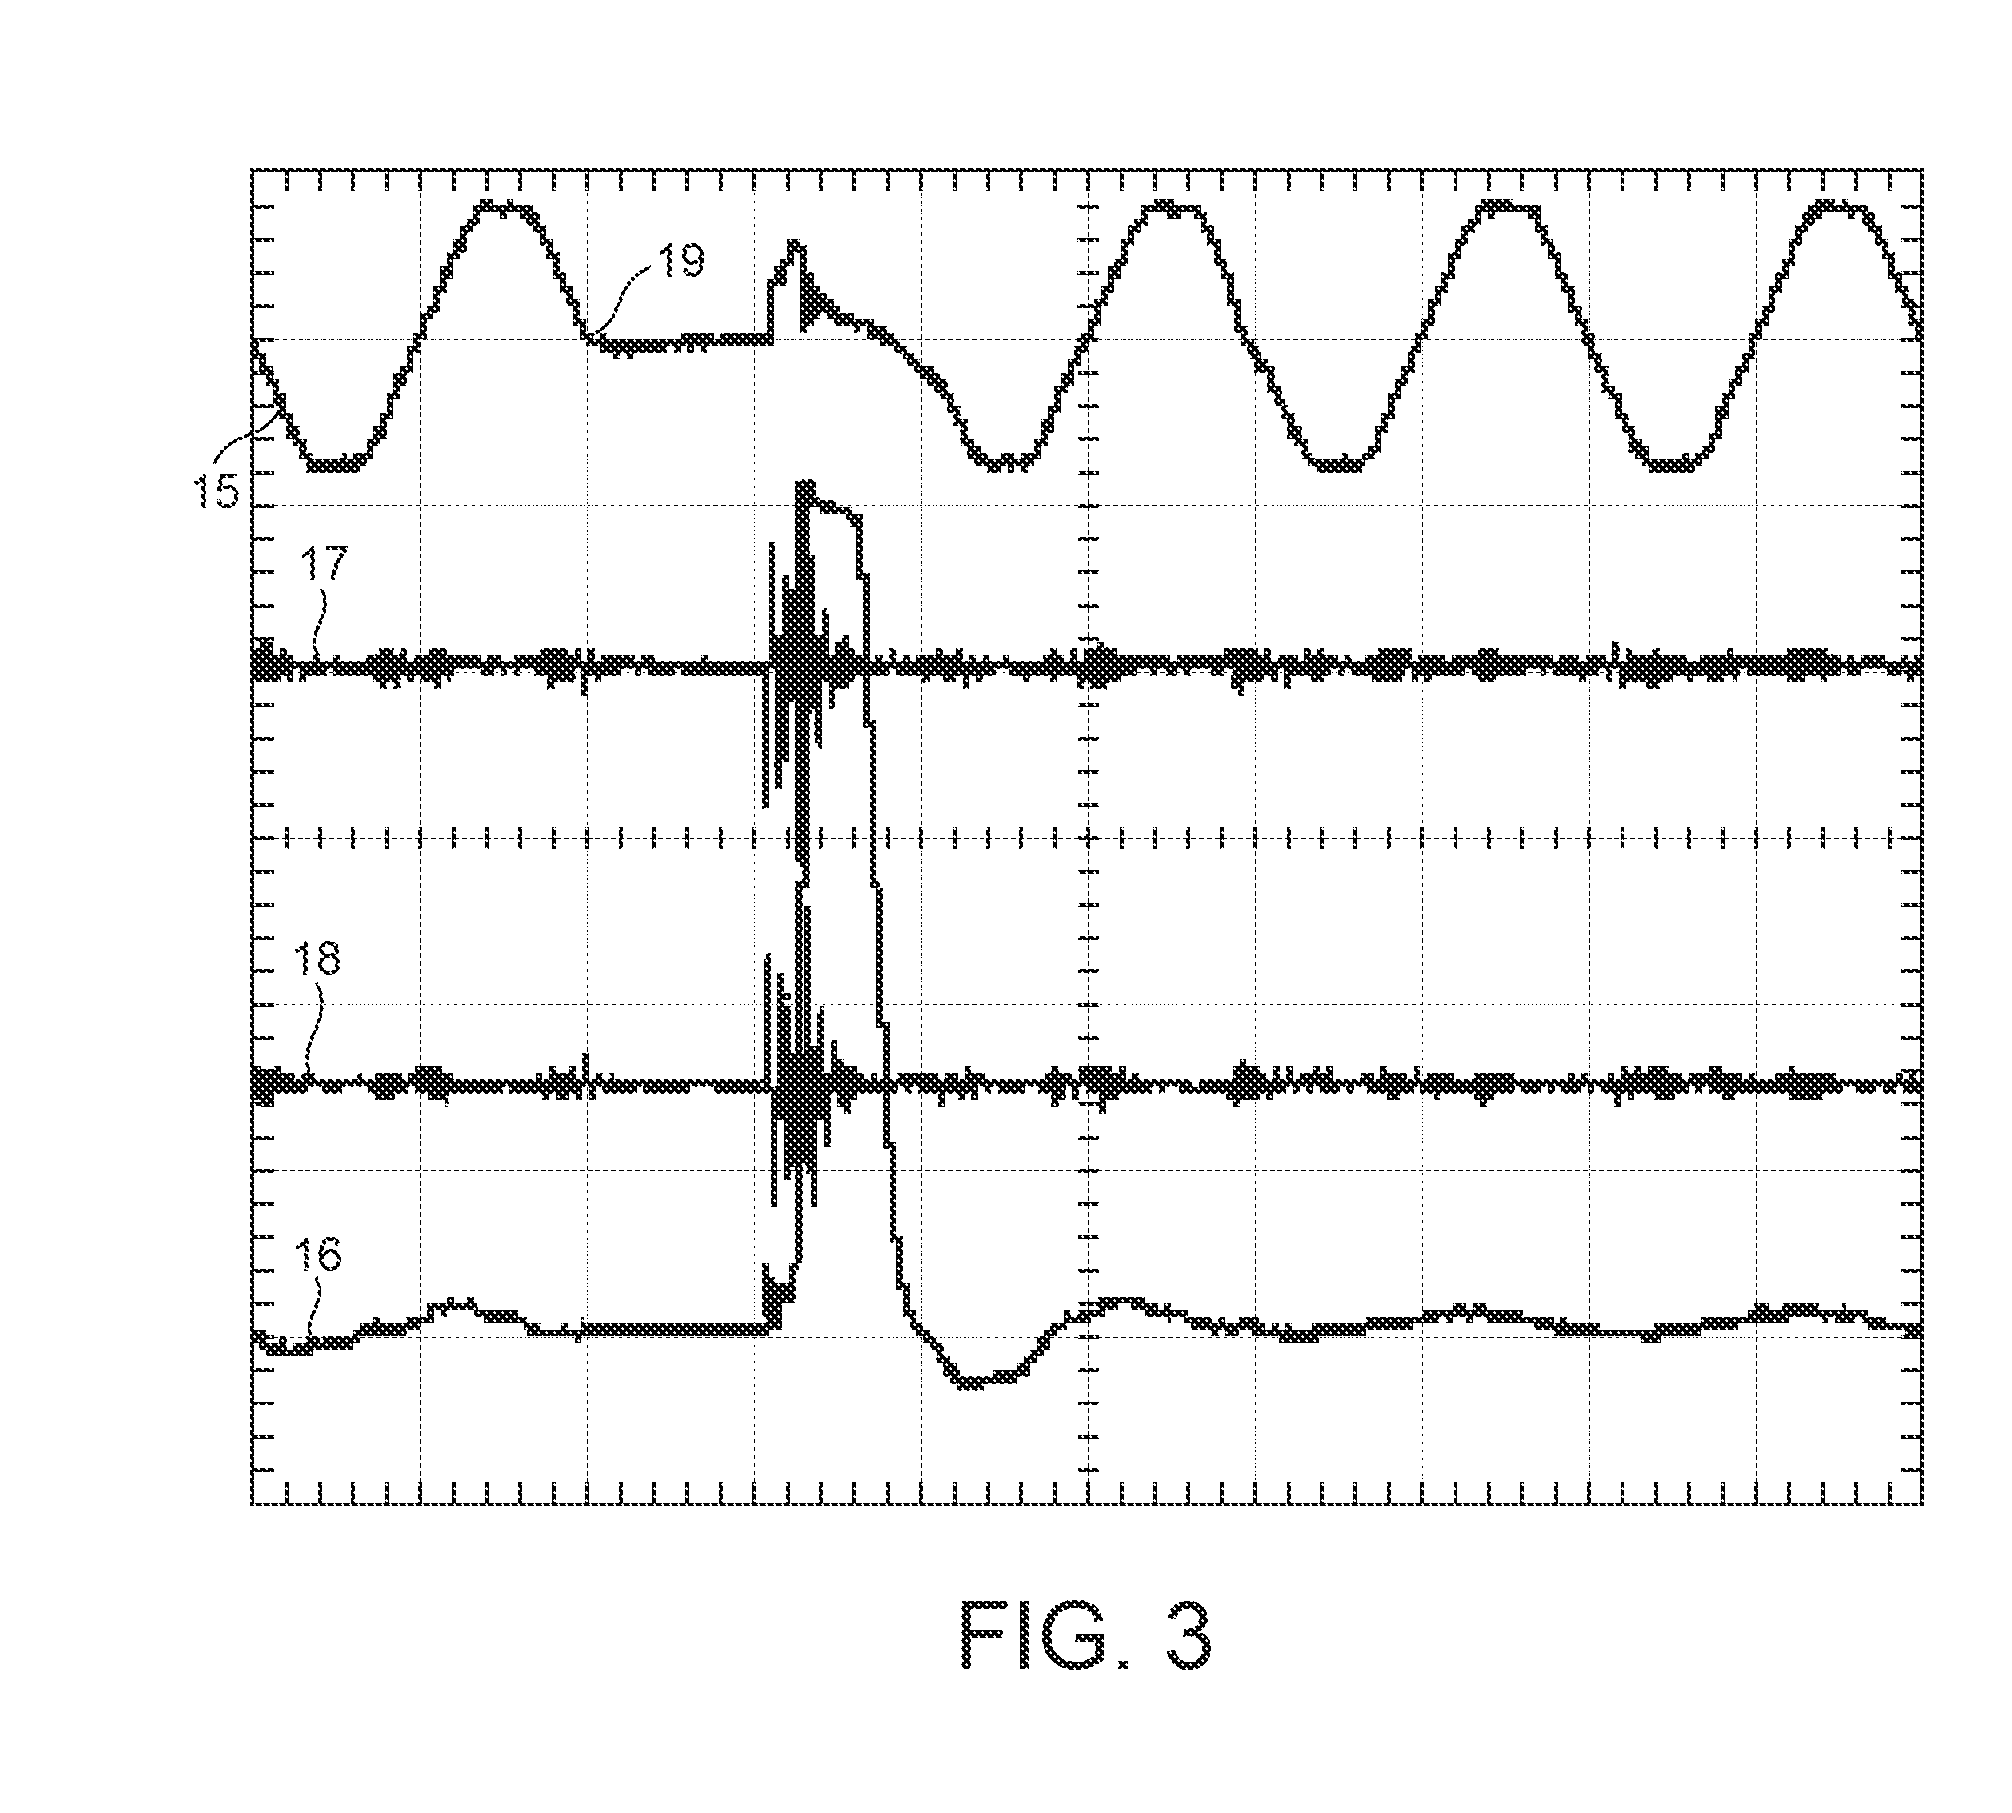 Protecting against transients in a communication system